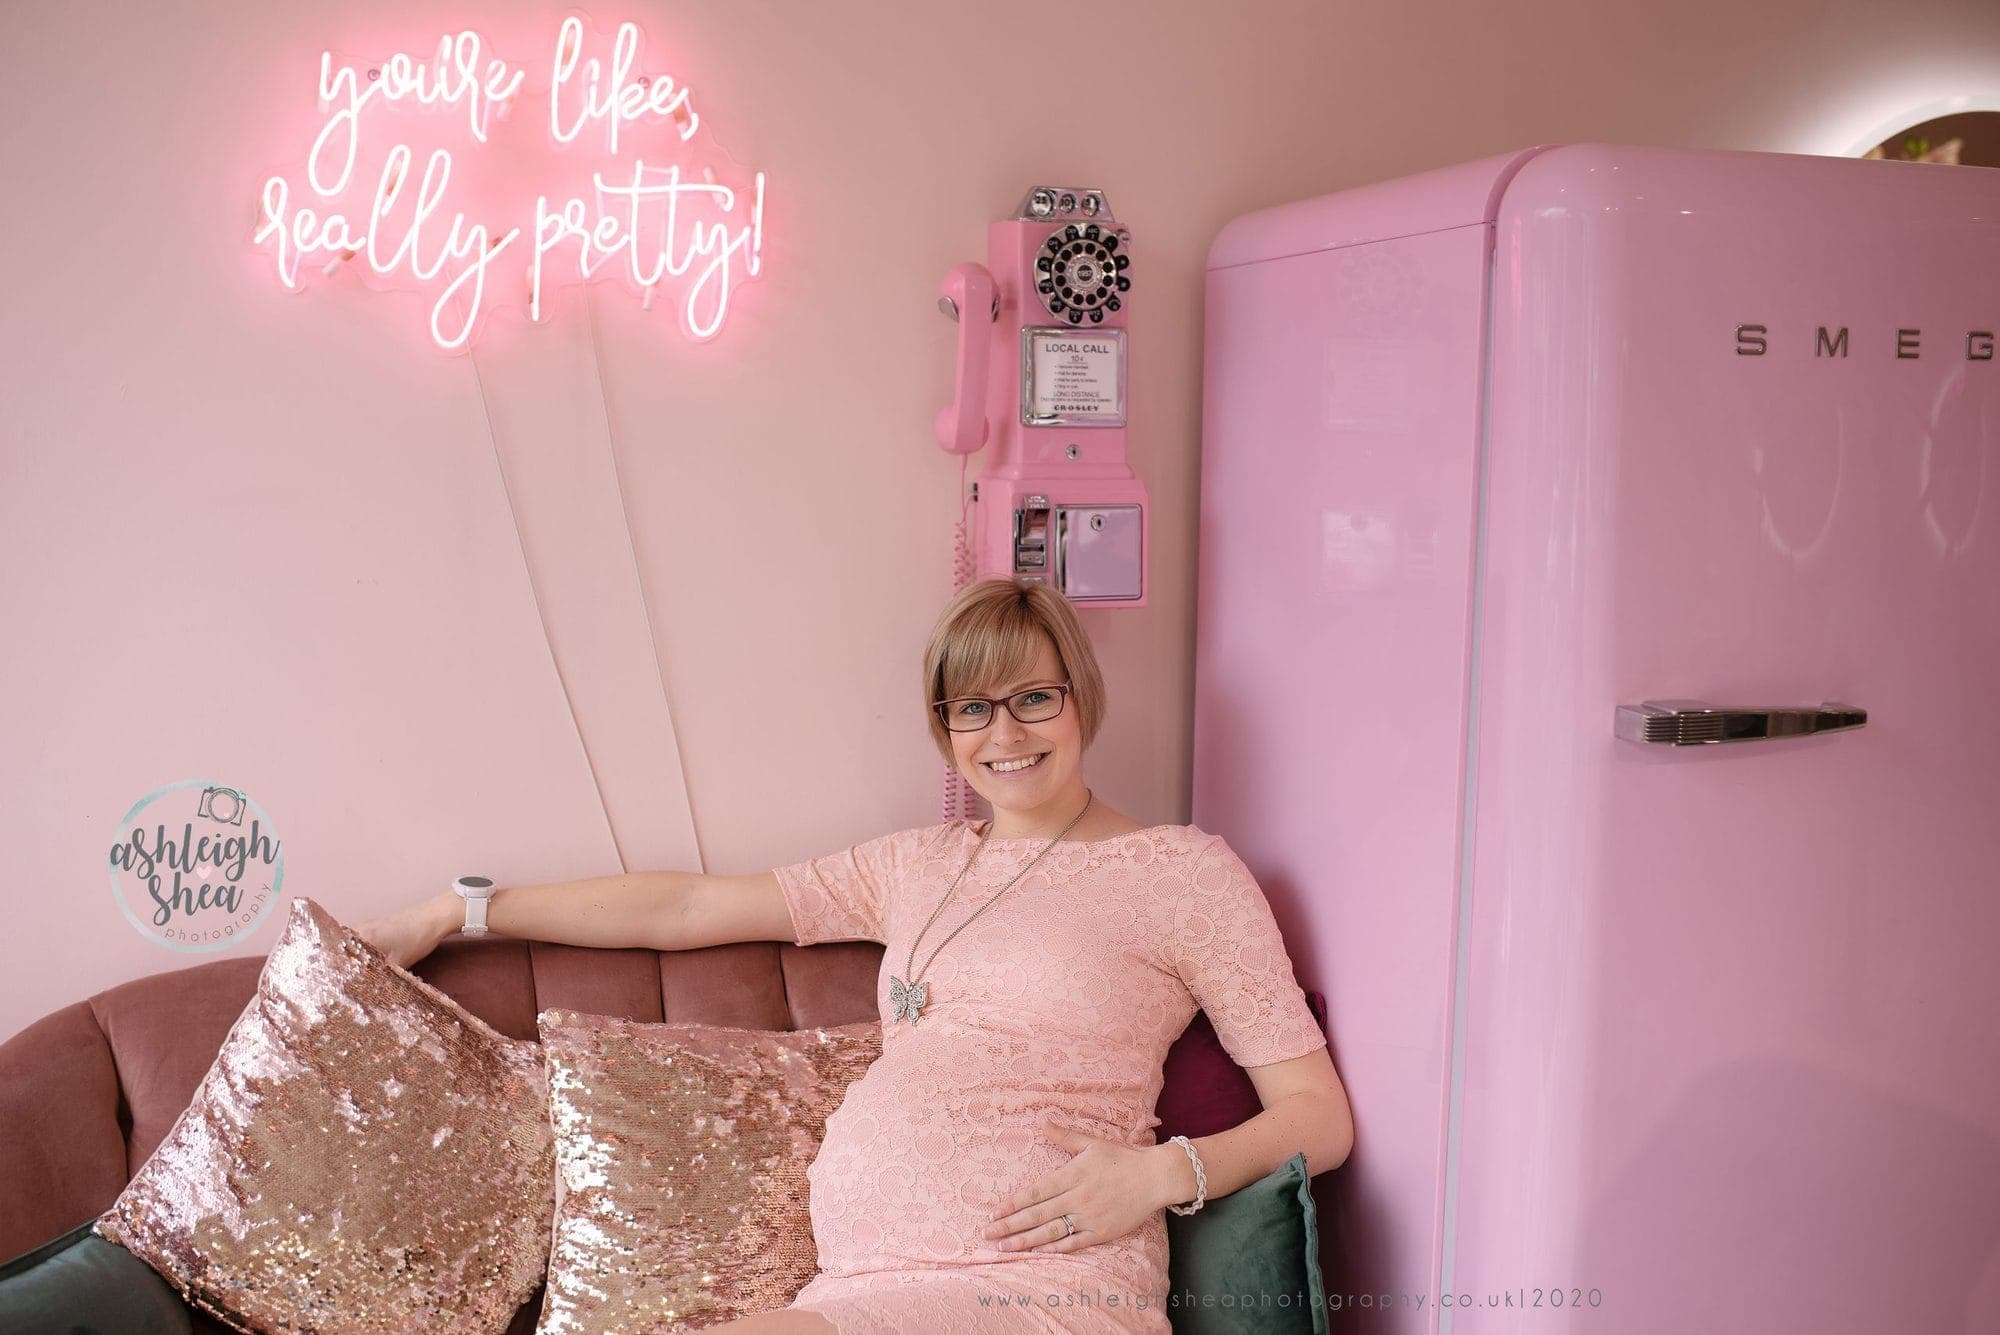 Pink, Dress, Baby Love, Mum To Be, Maternity Portraits, Pregnancy Pictures, Pregnant, Ashleigh Shea Photography, Blend Make Up London, Bromley, Sidcup, London,Kent